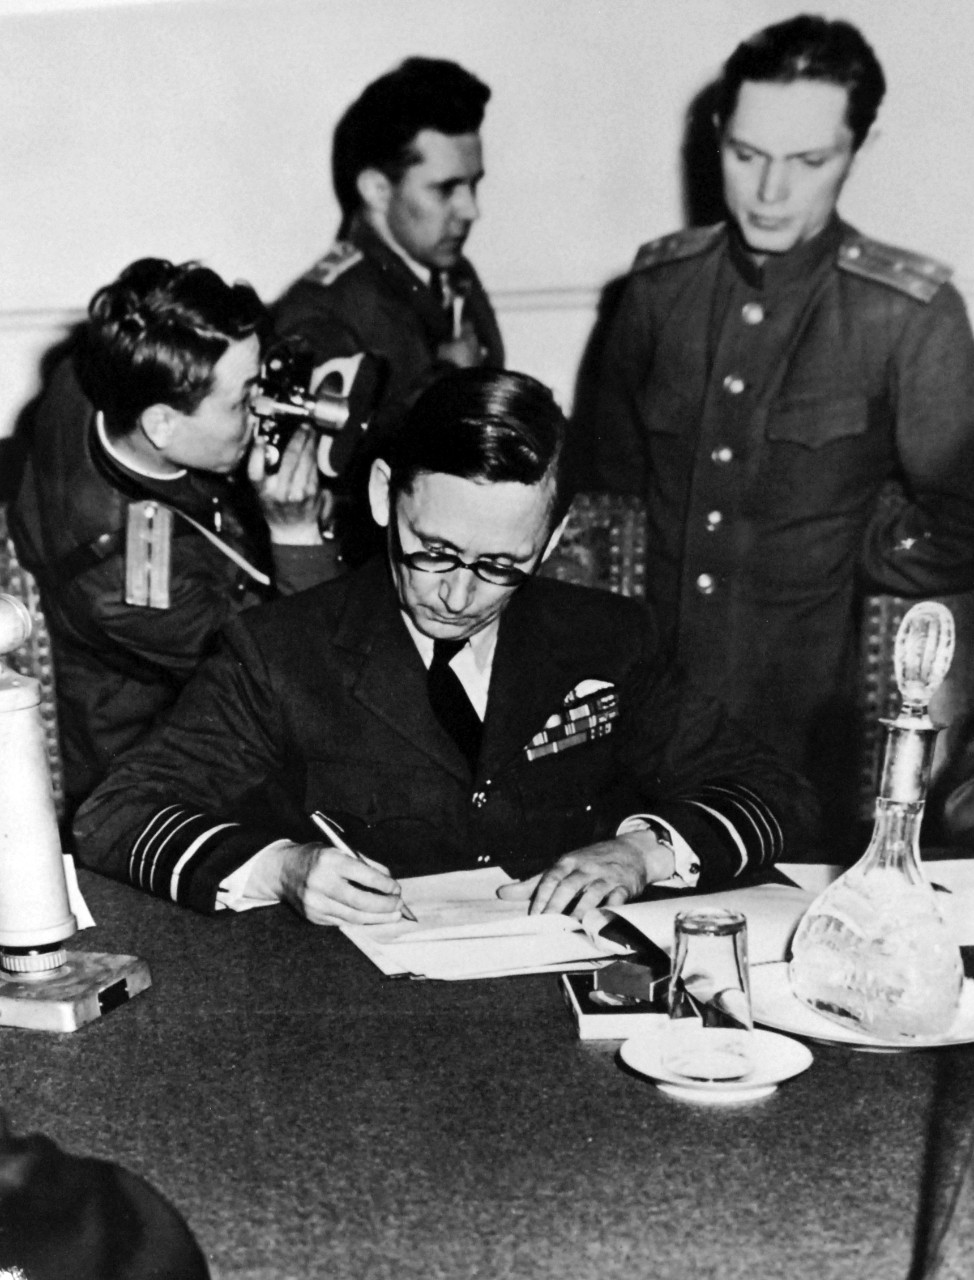 111-SC-27434: Surrender of Germany, 7 May 1945.  Air Chief Marshall Sir Arthur Tedder, Deputy Supreme Commander, signs the ratified “Unconditional Surrender” terms at Russin Headquarters in Berlin, Germany.  These terms were agreed to at Riems, France.  U.S. Army Photograph.  Courtesy of the Library of Congress Collection, Lot-8988. (2015/10/16).